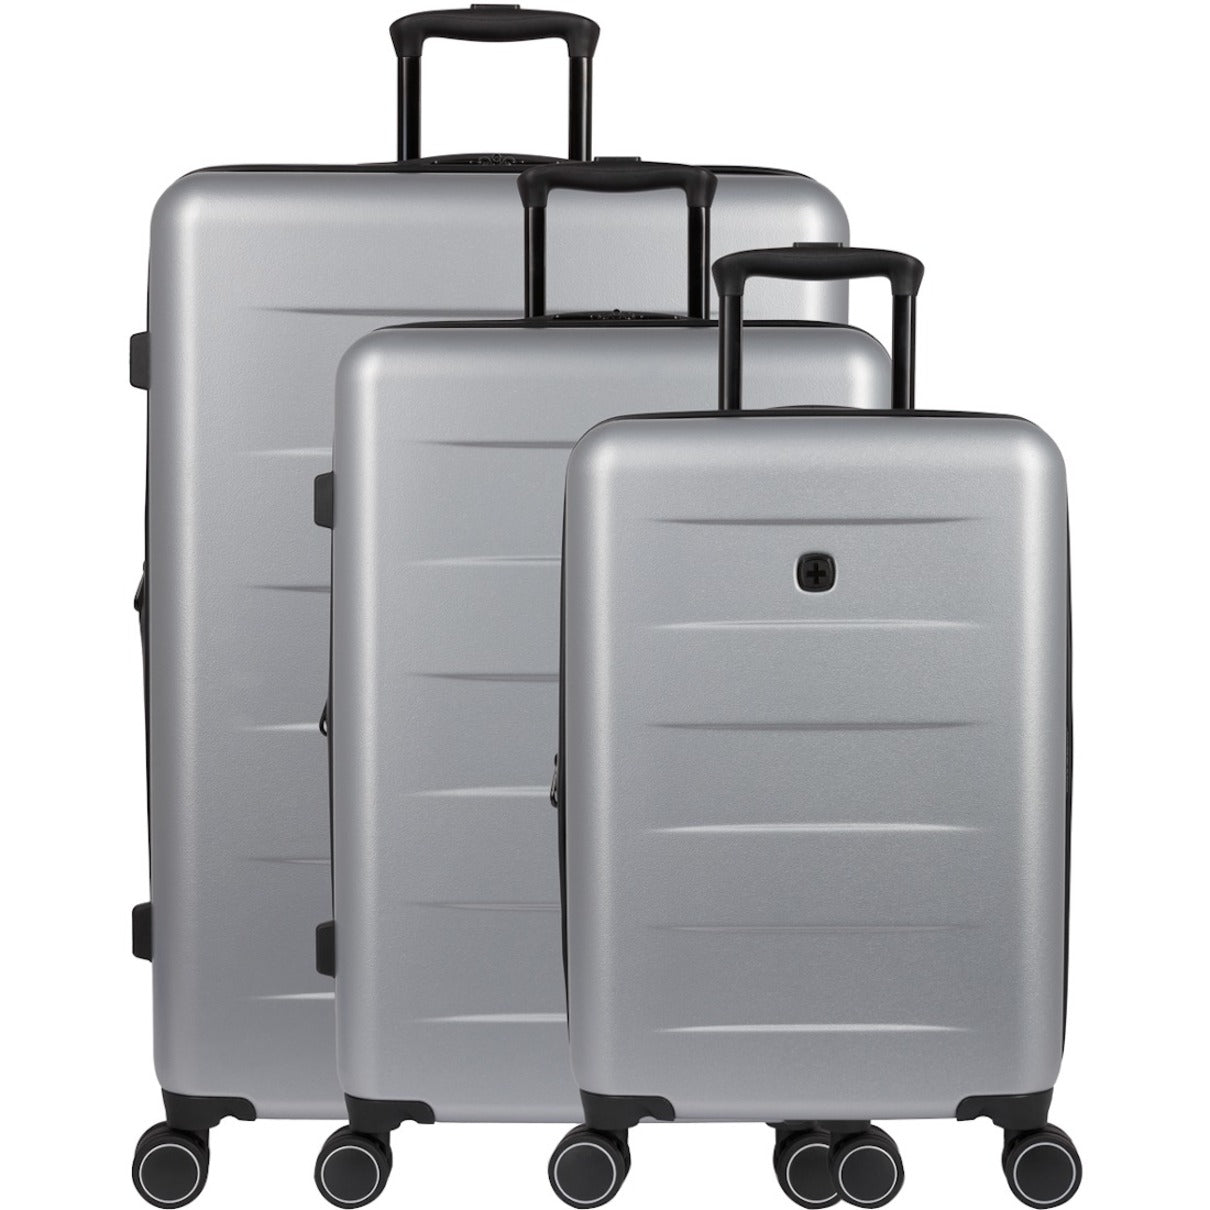 SwissGear 80203414 8020 Expandable Hardside Spinner 3pc Luggage Set, Ultimate Gray - Rugged Travel Essential